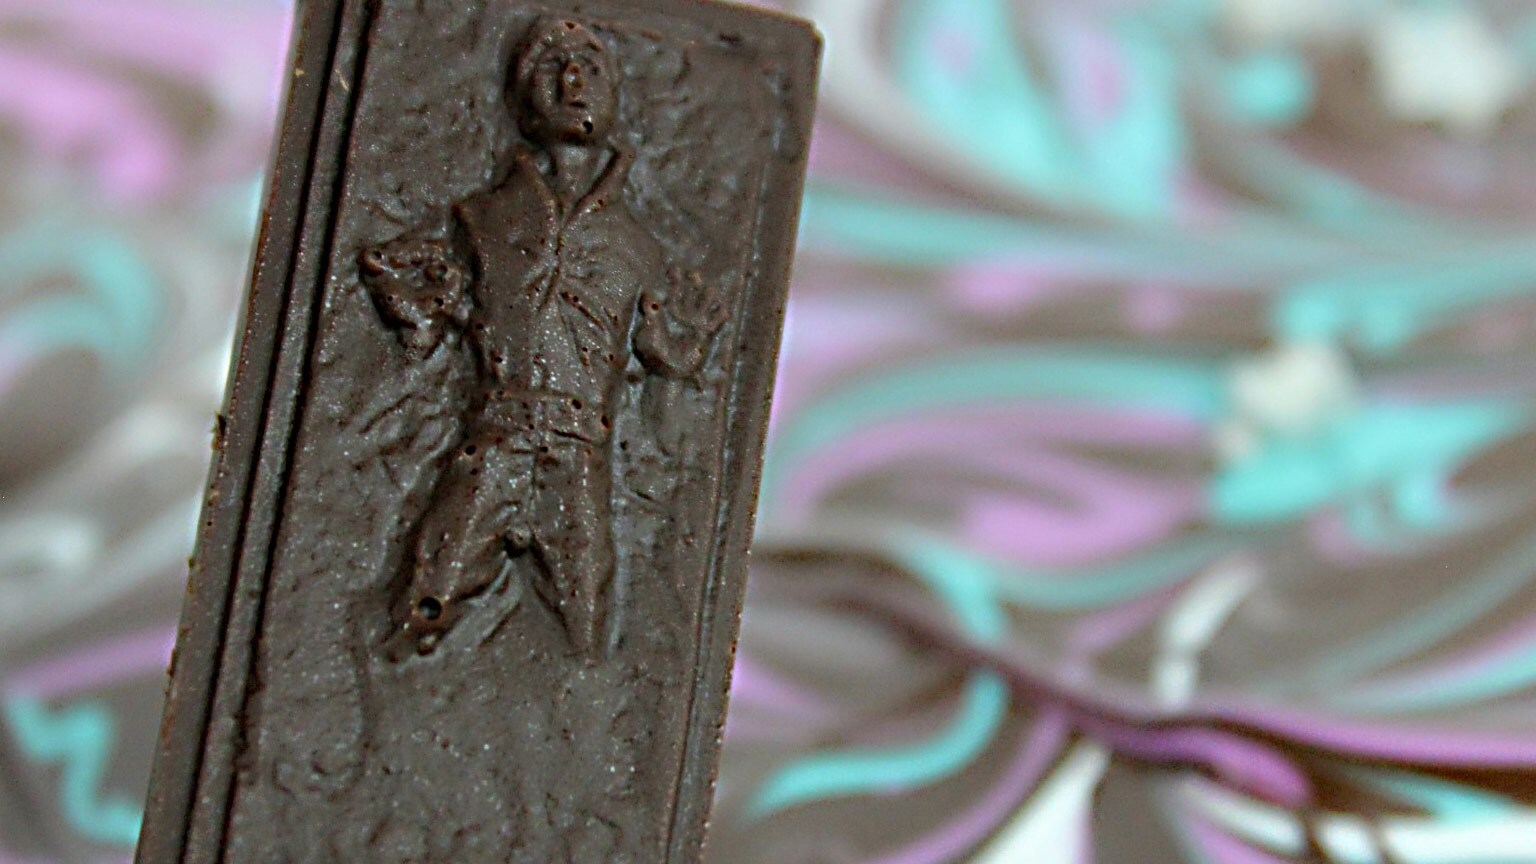 From Jabba's Favorite Decoration to Our Favorite Dessert: Han Solo Chocolate Carbonite Bark!